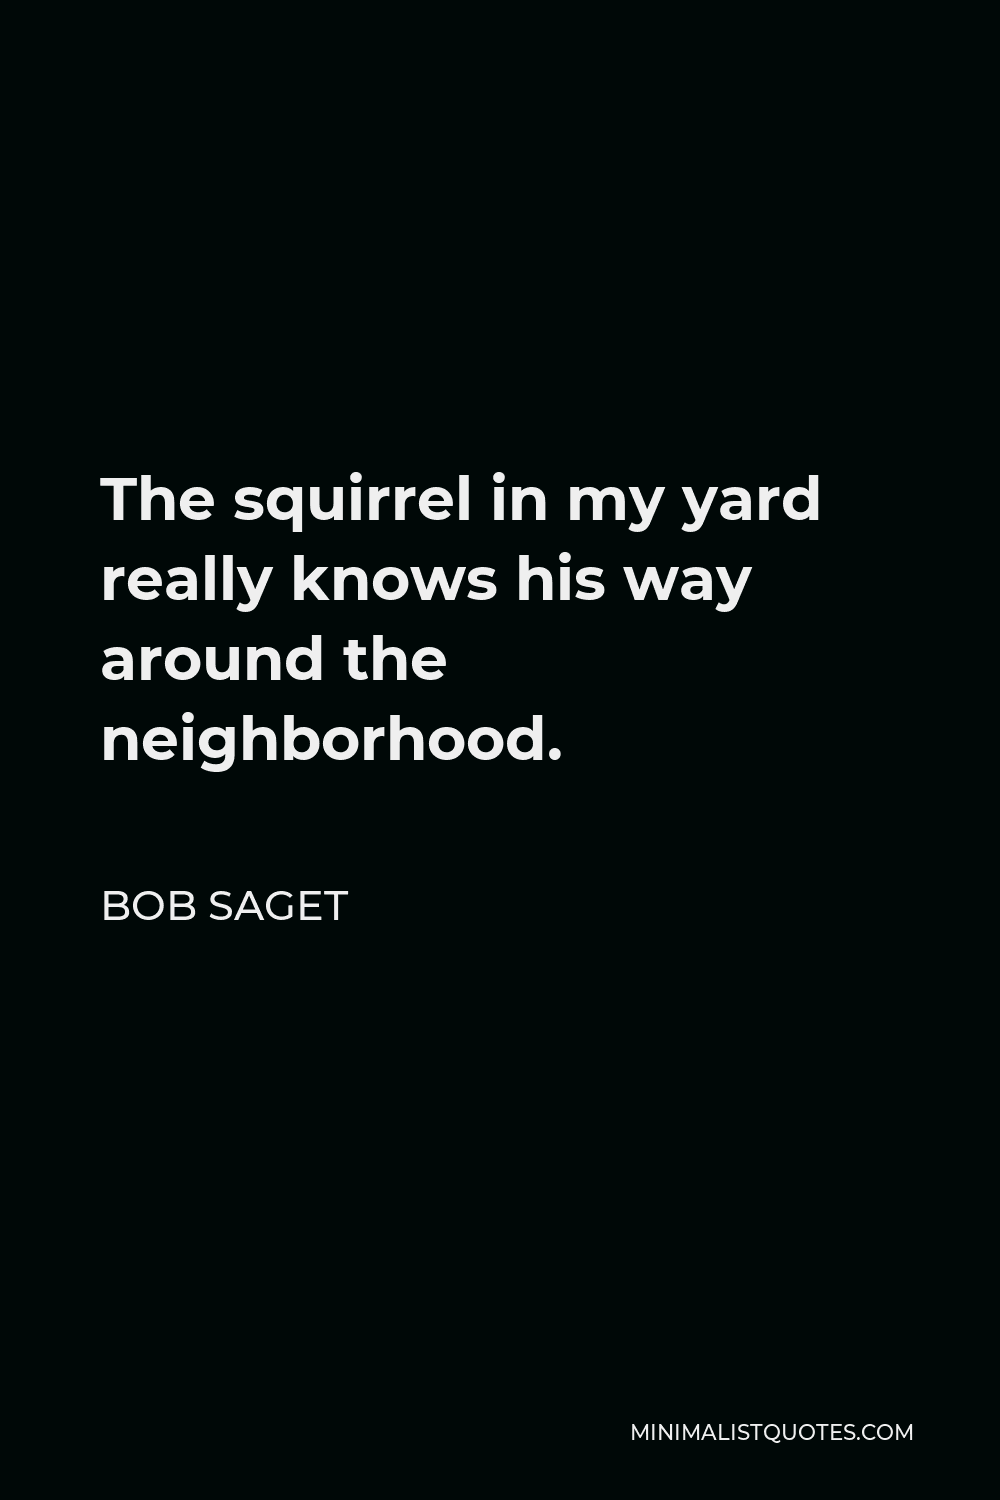 Bob Saget Quote - The squirrel in my yard really knows his way around the neighborhood.